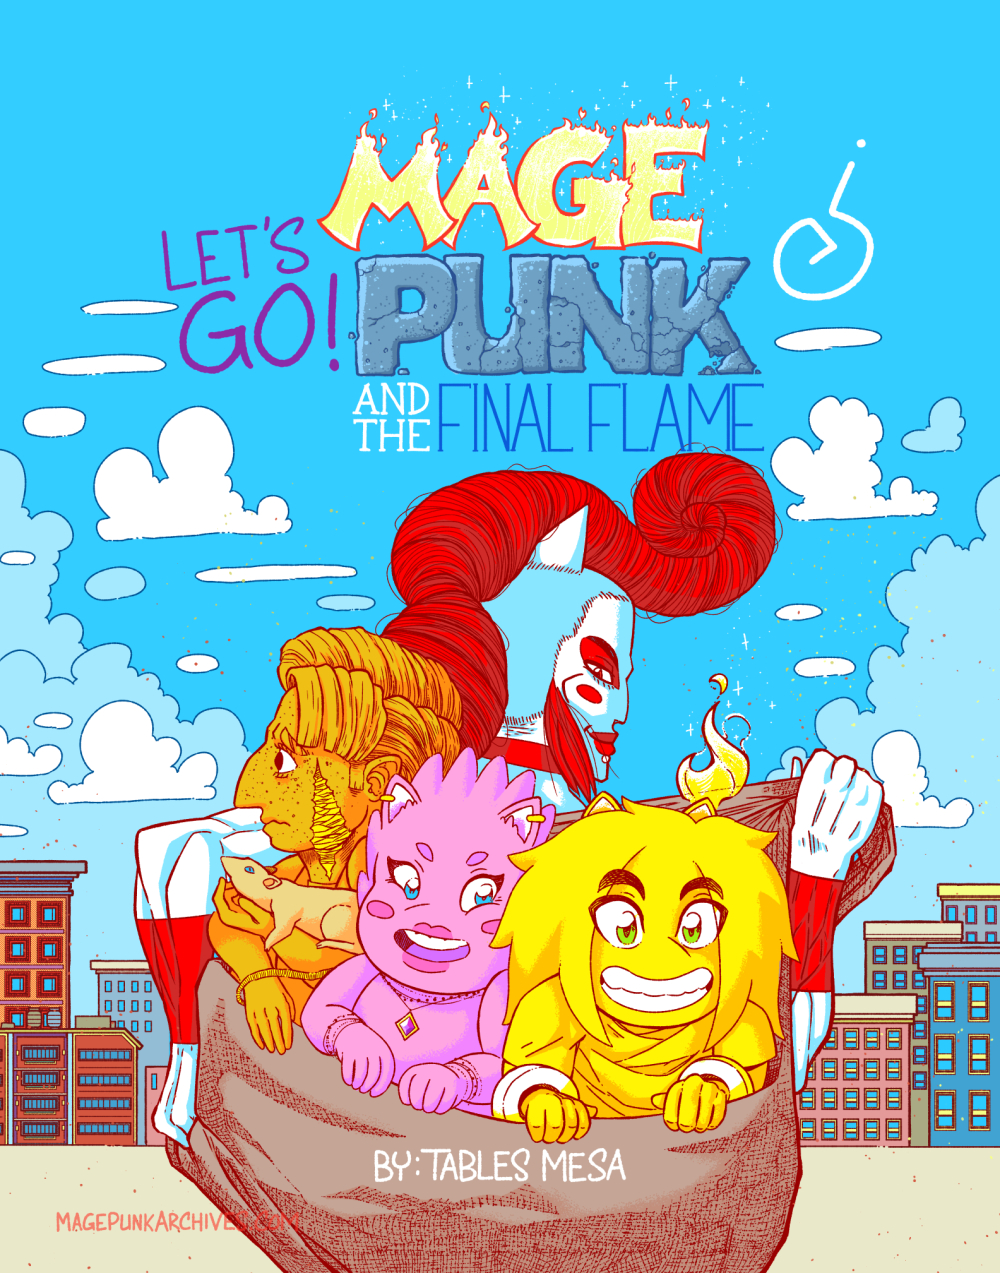 Let’s Go! Mage Punk and the Final Flame! – Front Cover